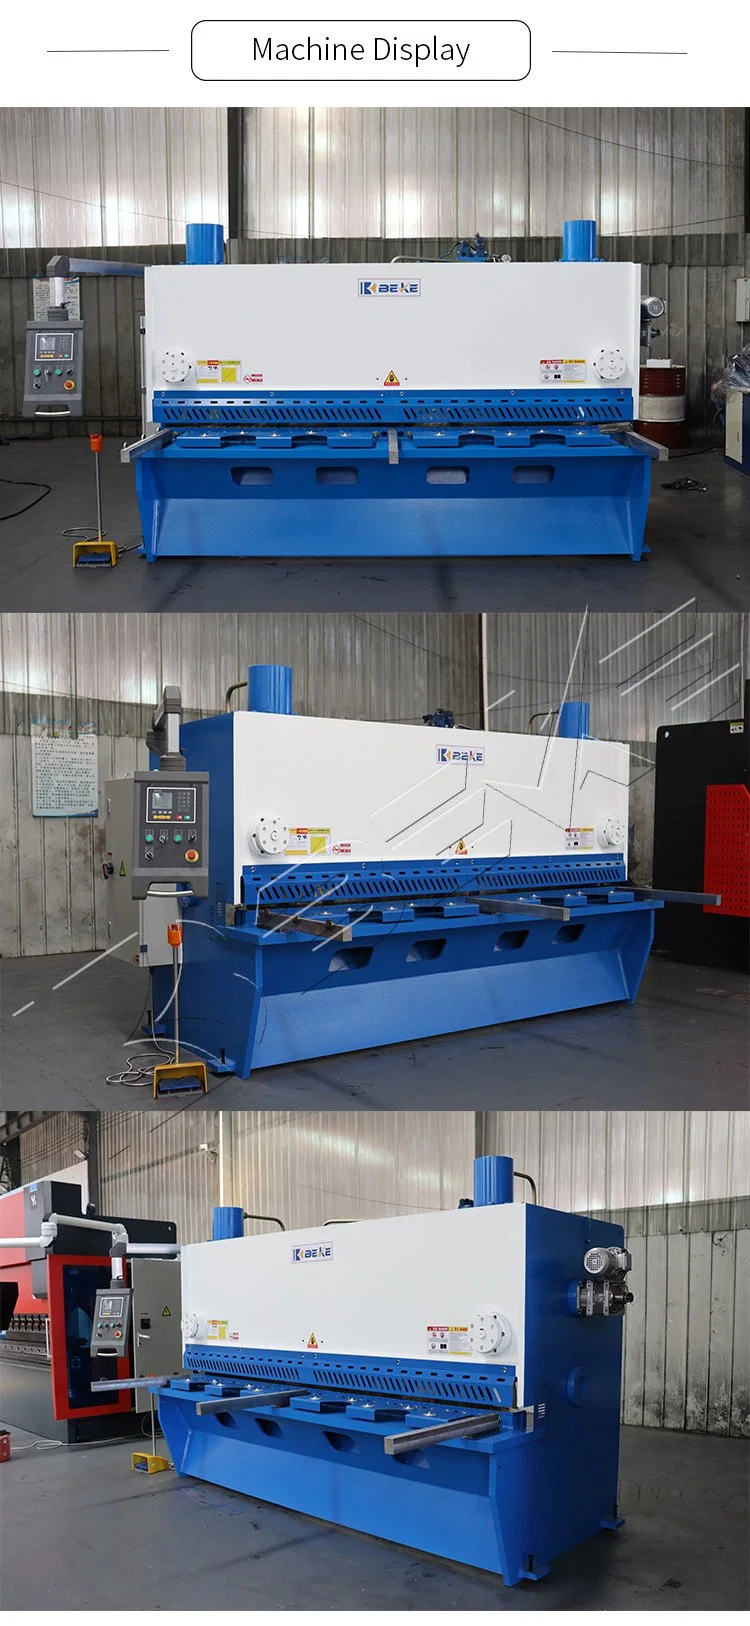 Aluminium Stainless Steel Sheet Meatl CNC Hydraulic Automatic Guillotine Cutter Machine